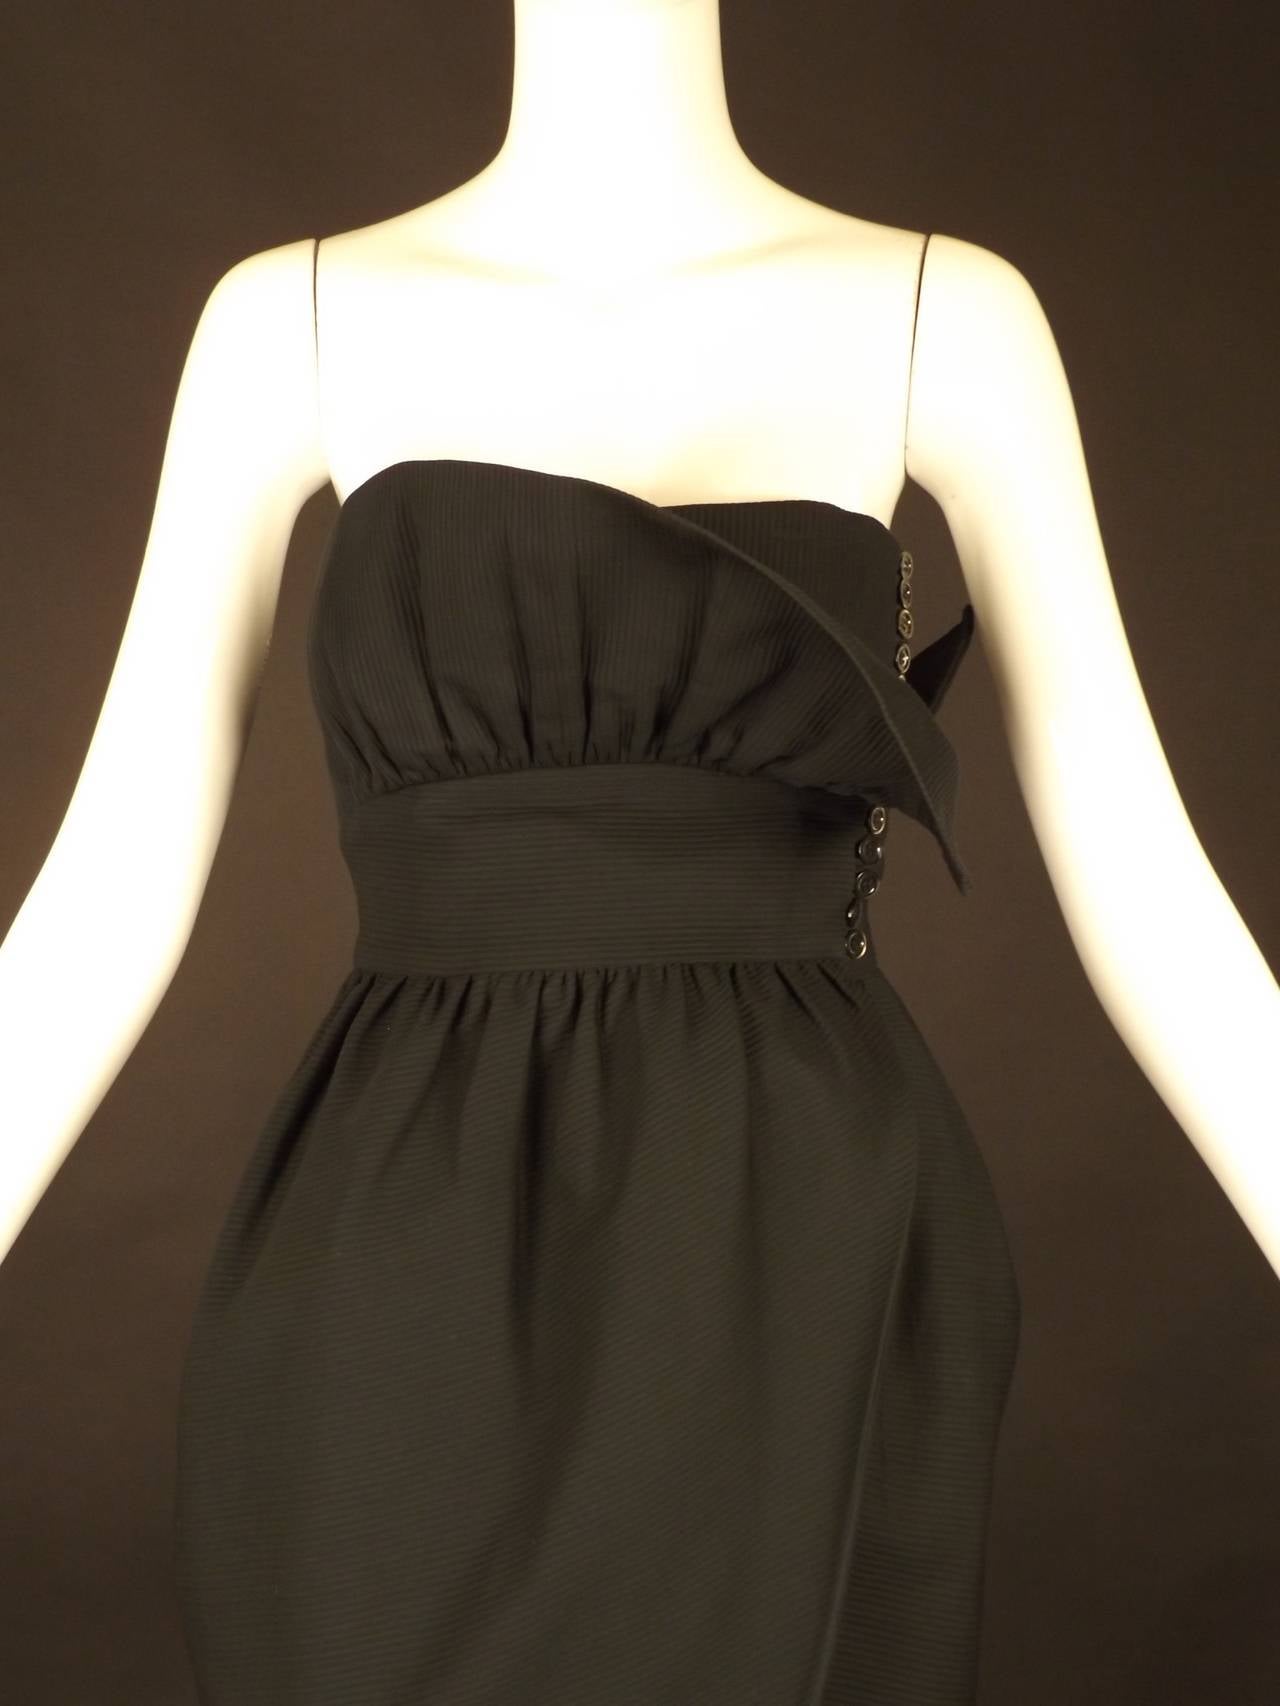 Adorable 1990s cocktail dress in a black ribbed cotton. The dress wraps across the front with button closures down the left side. Strapless with a midriff yoke and a dart fitted bodice. The front overlap is gathered creating a standing ruffle across